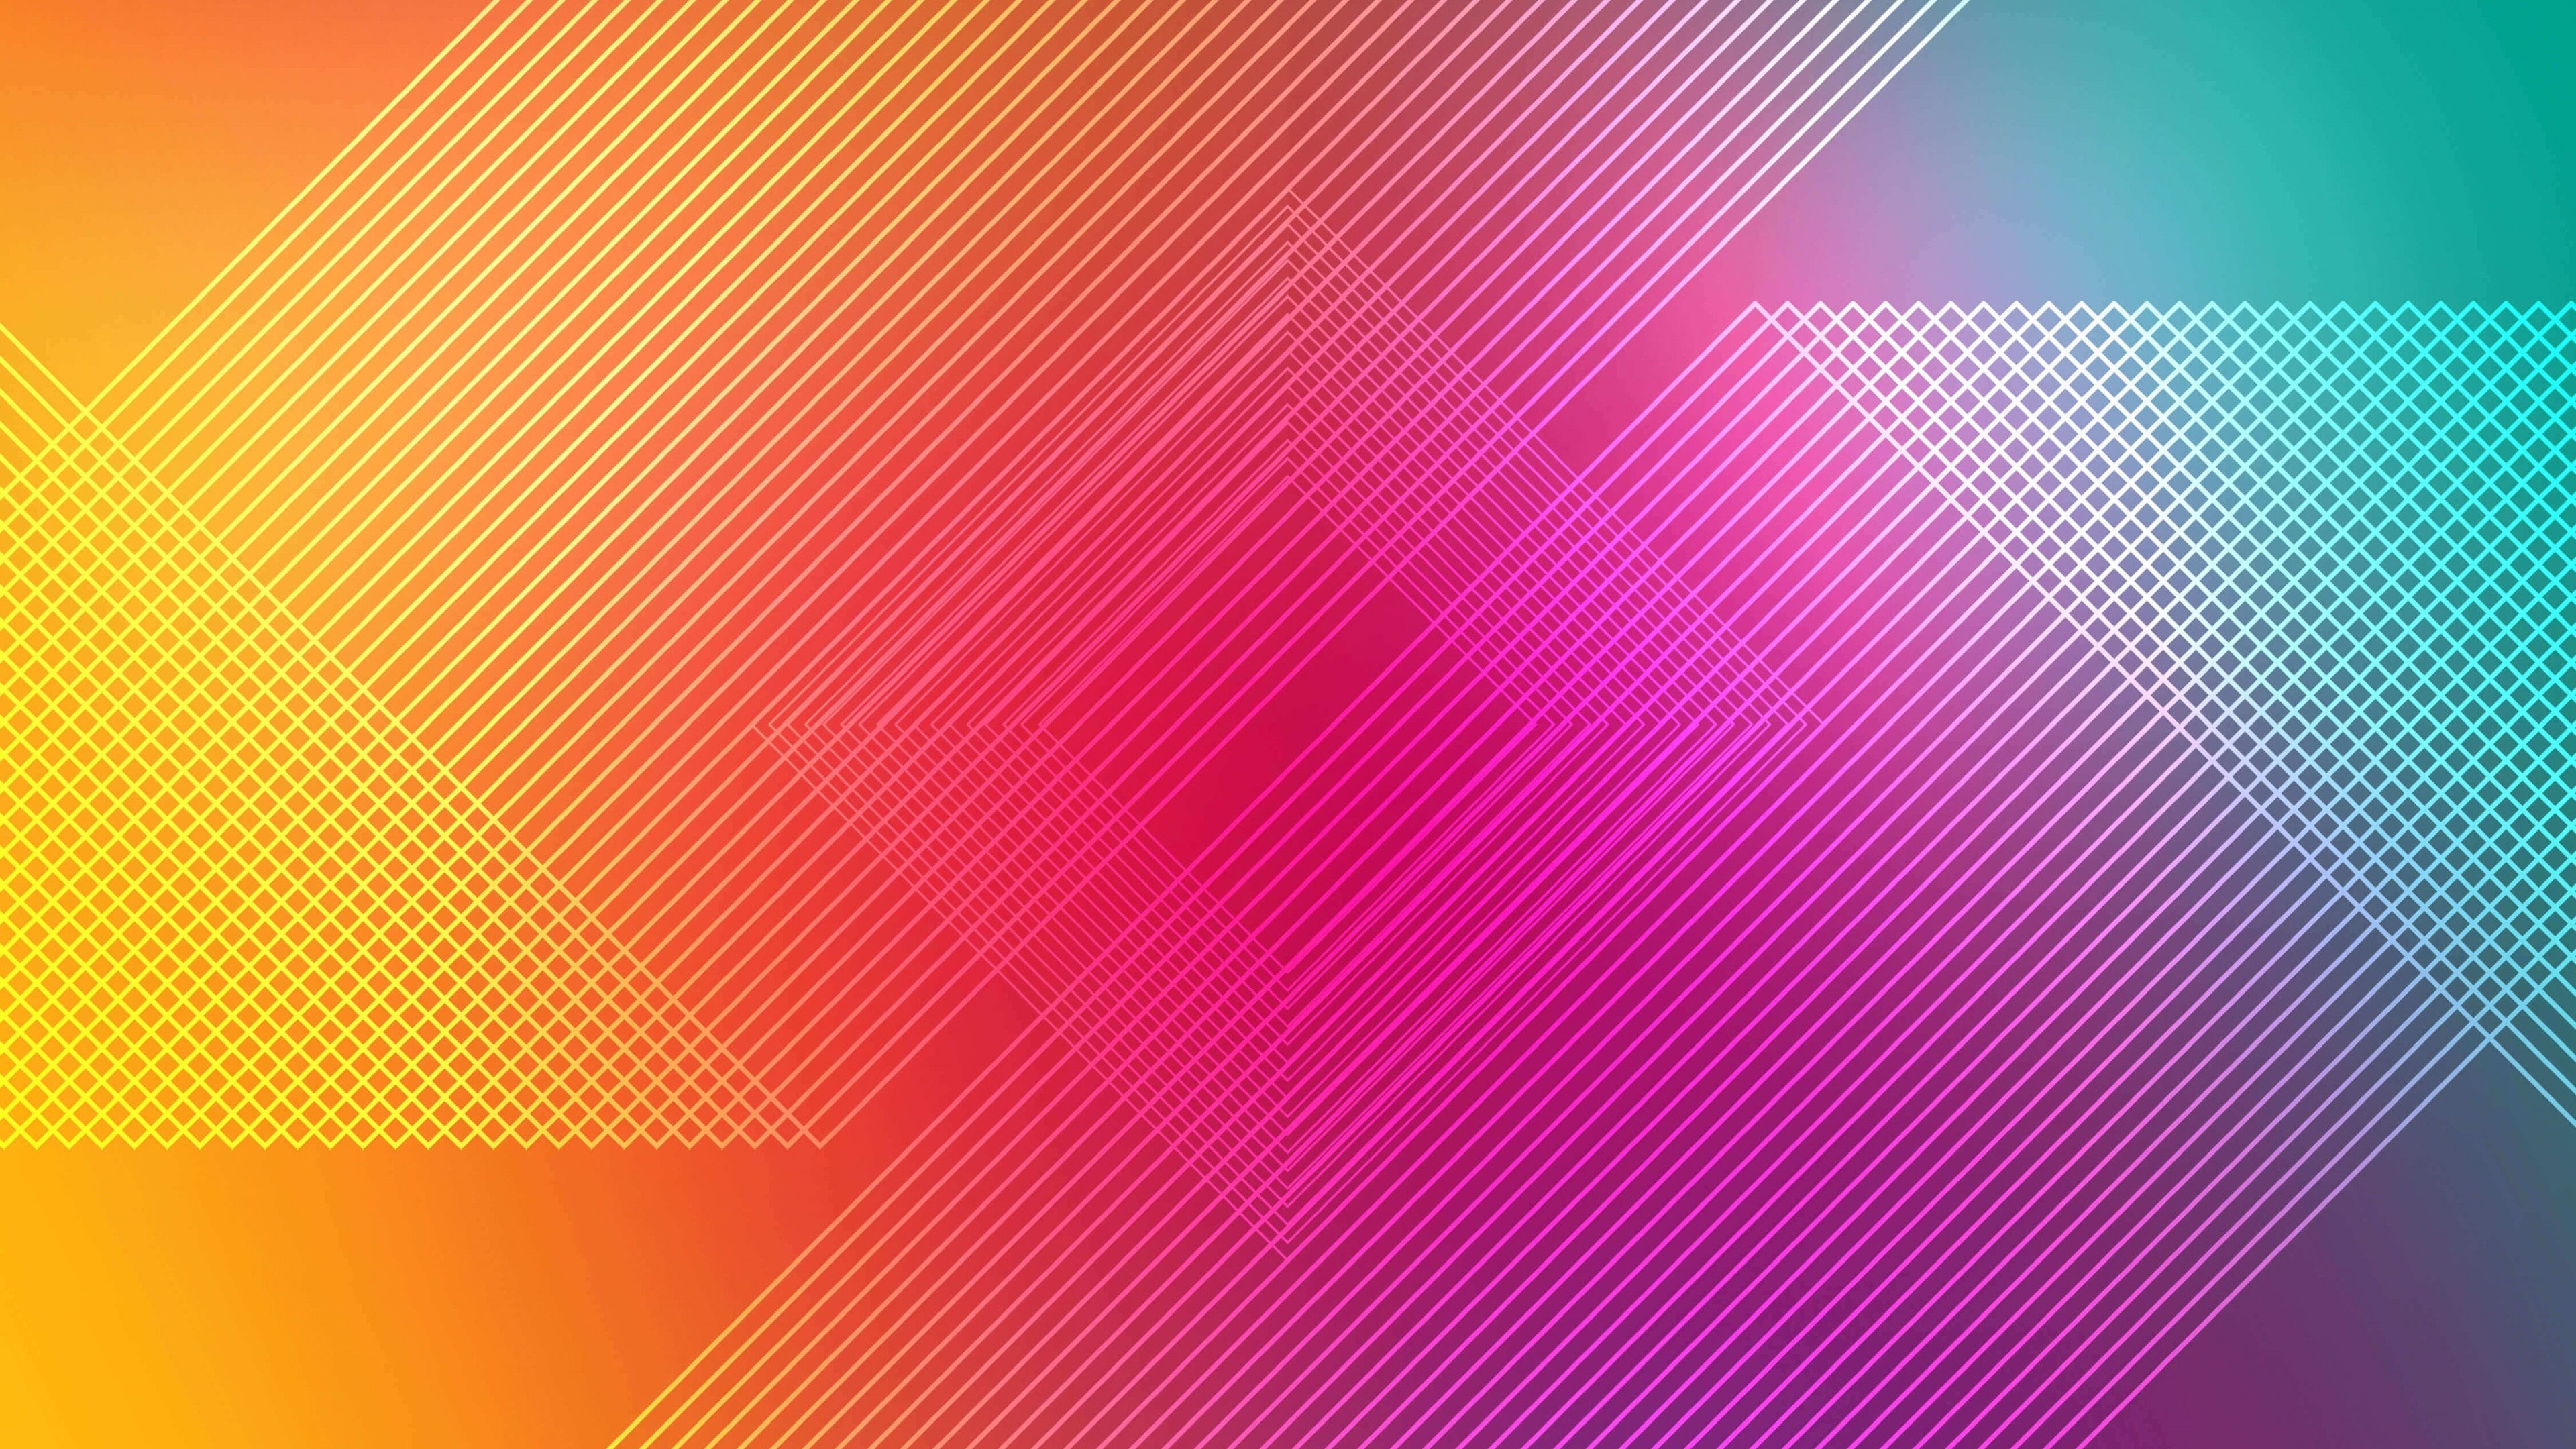 Download 3840x2160 Wallpaper Multicolor Abstract Lines Pattern 4k